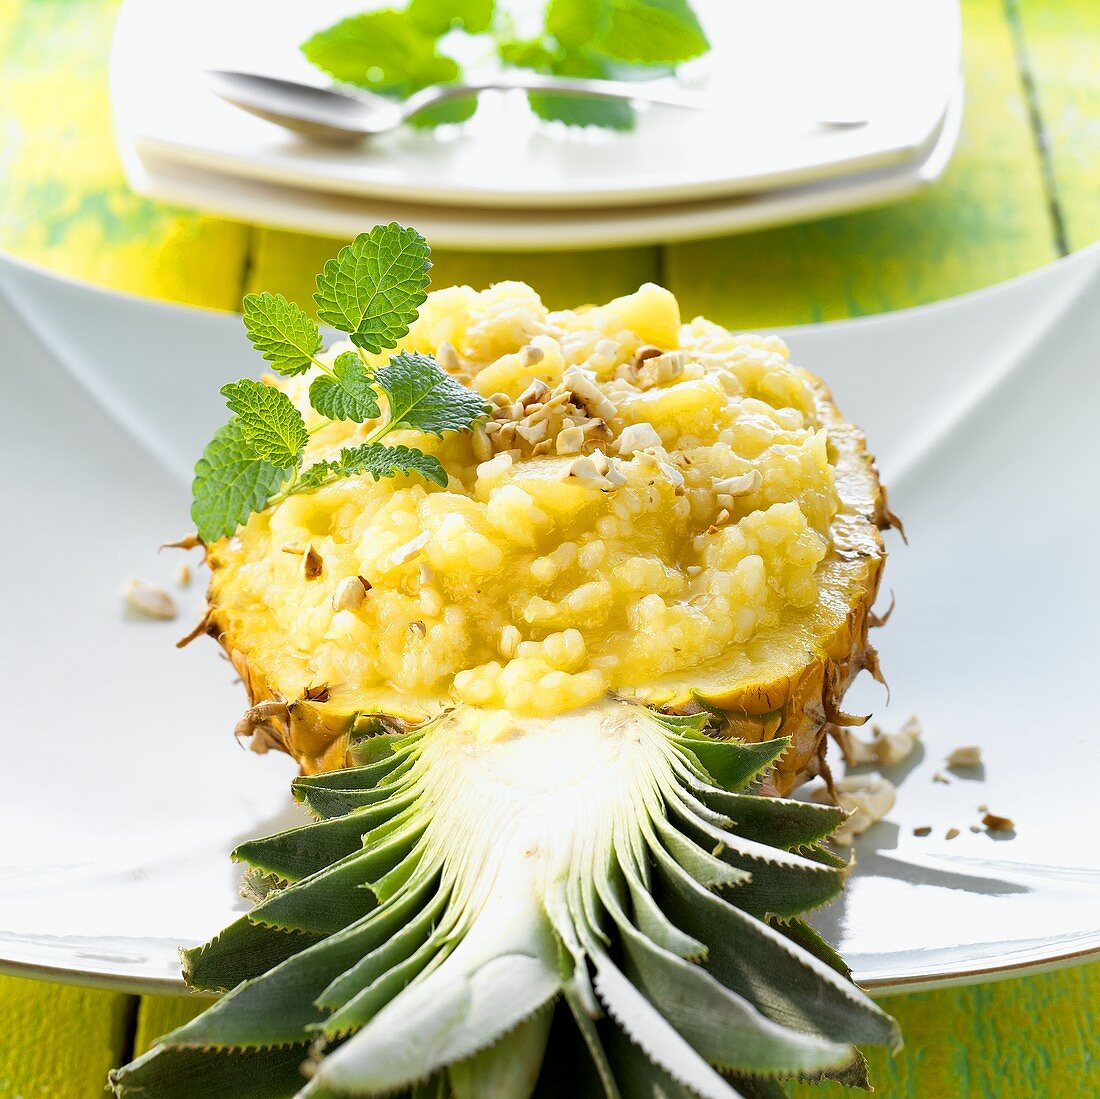 Pineapple rice with nuts in a pineapple half (Thailand)